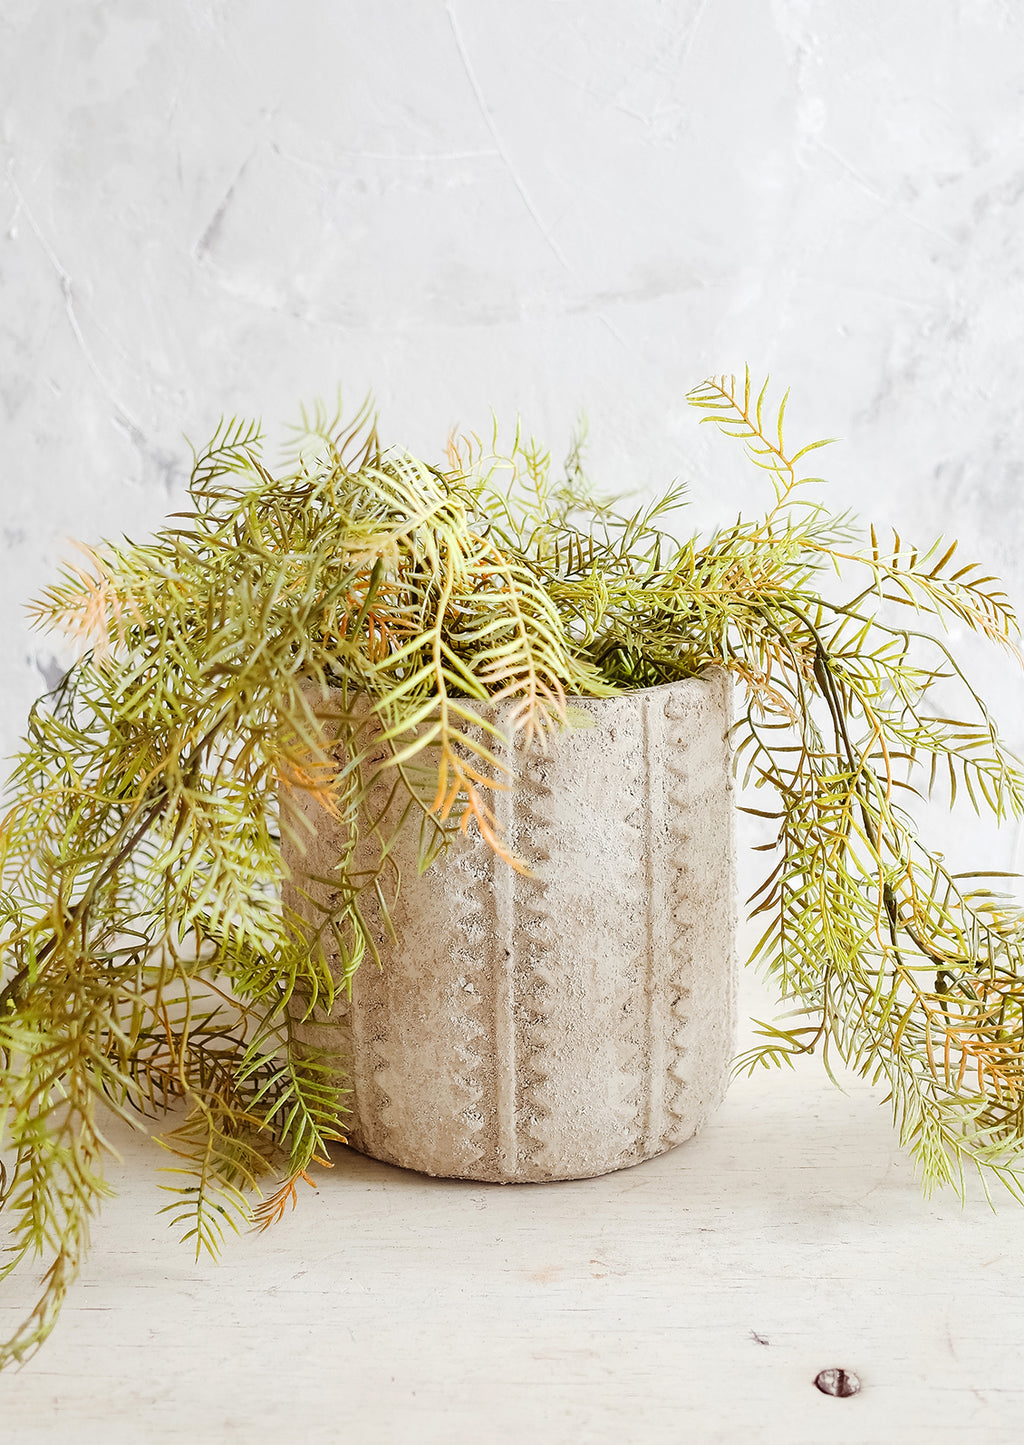 2: Distressed planter in concrete-like texture with stripe and zigzag detailing with trailing plant